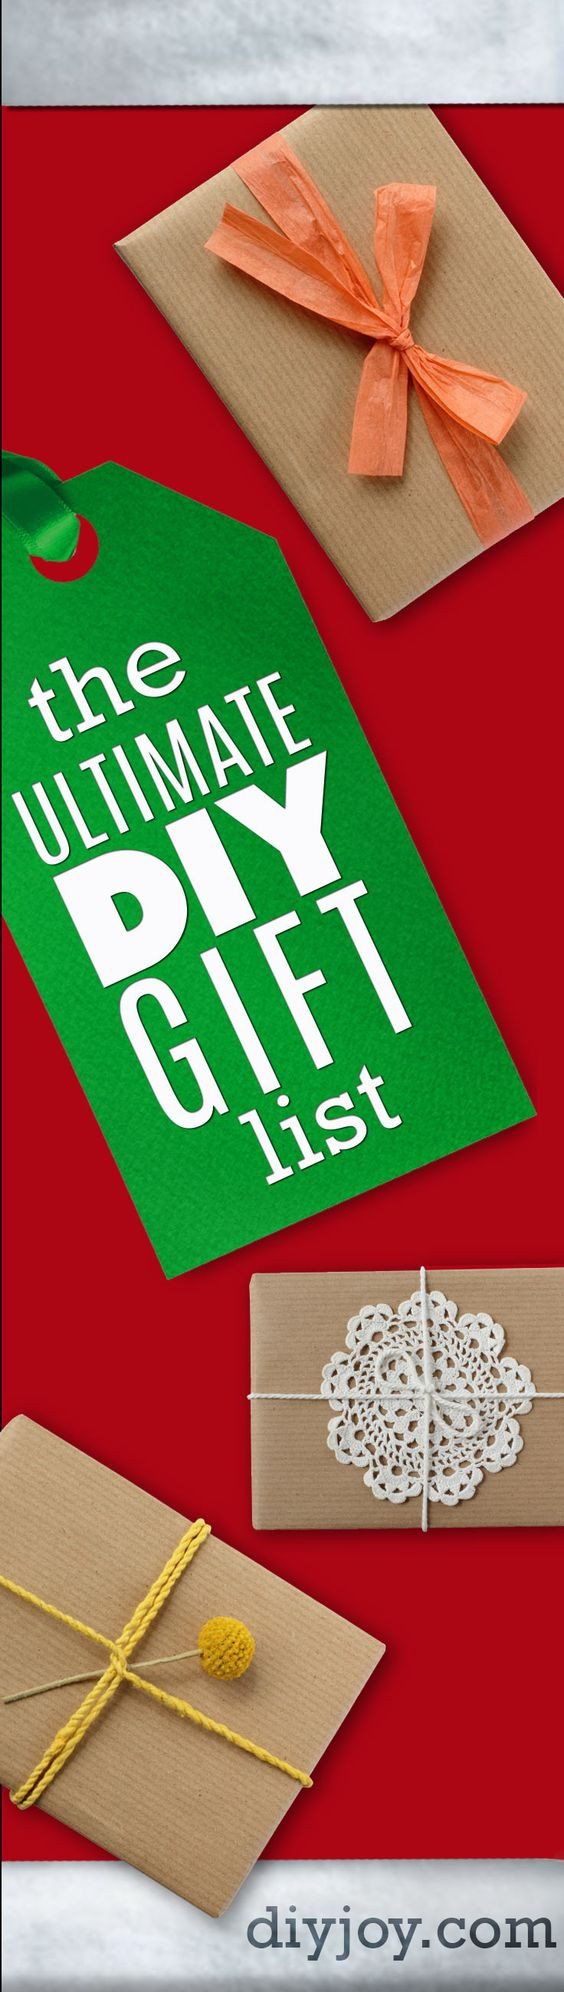 Gift Ideas For Girlfriends Parents
 Diy christmas ts Homemade and Gifts on Pinterest